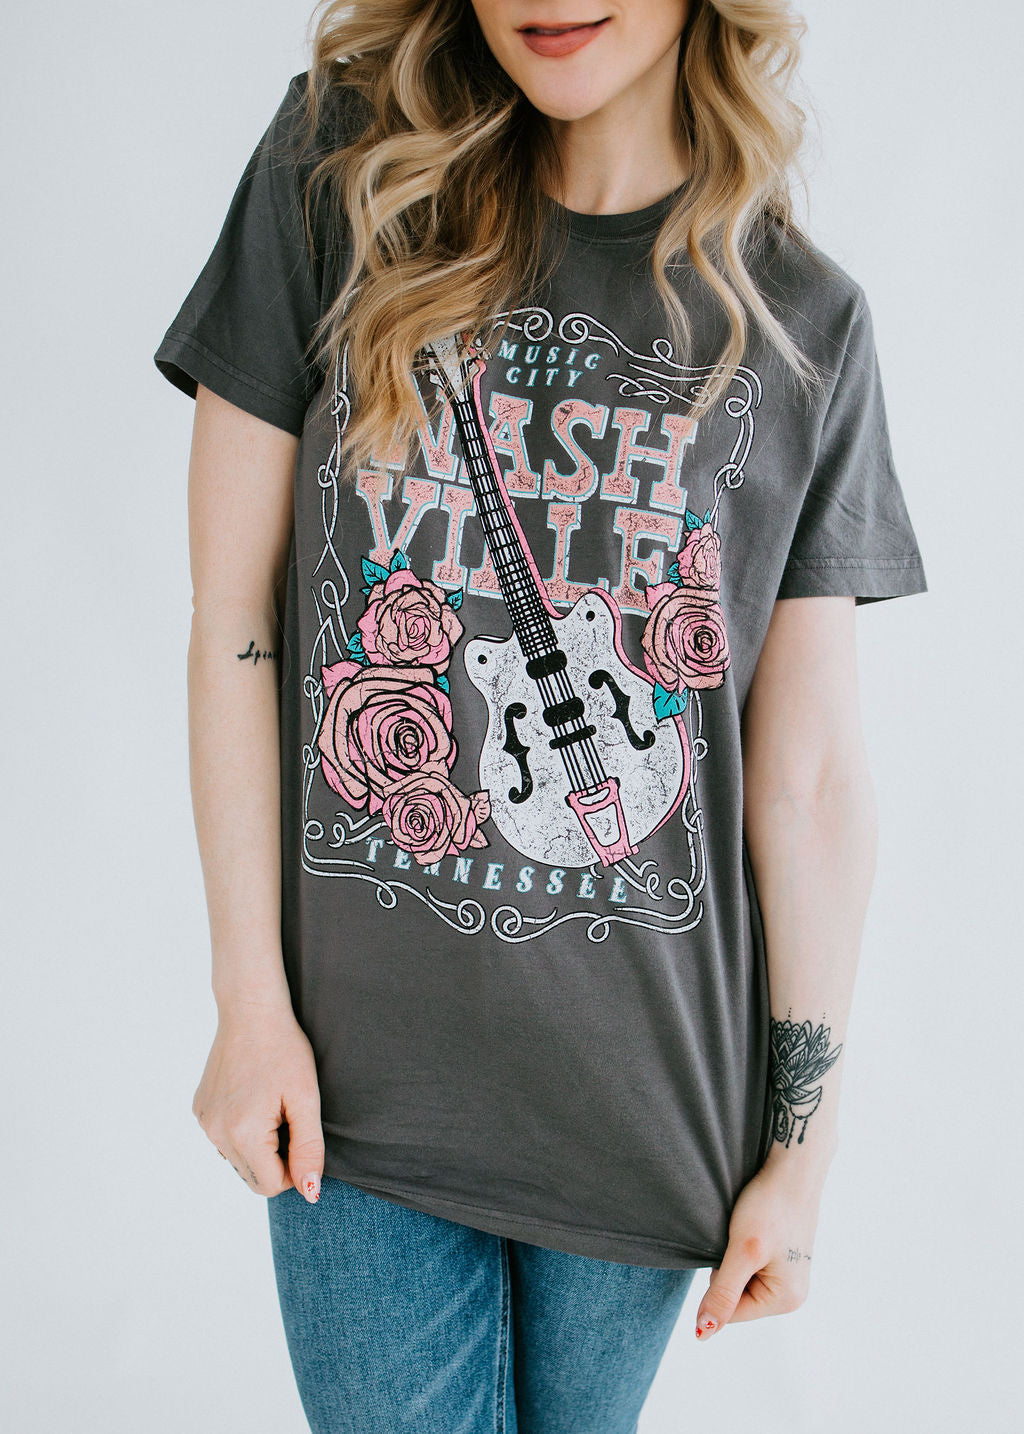 image of Nashville Tennessee Graphic Tee